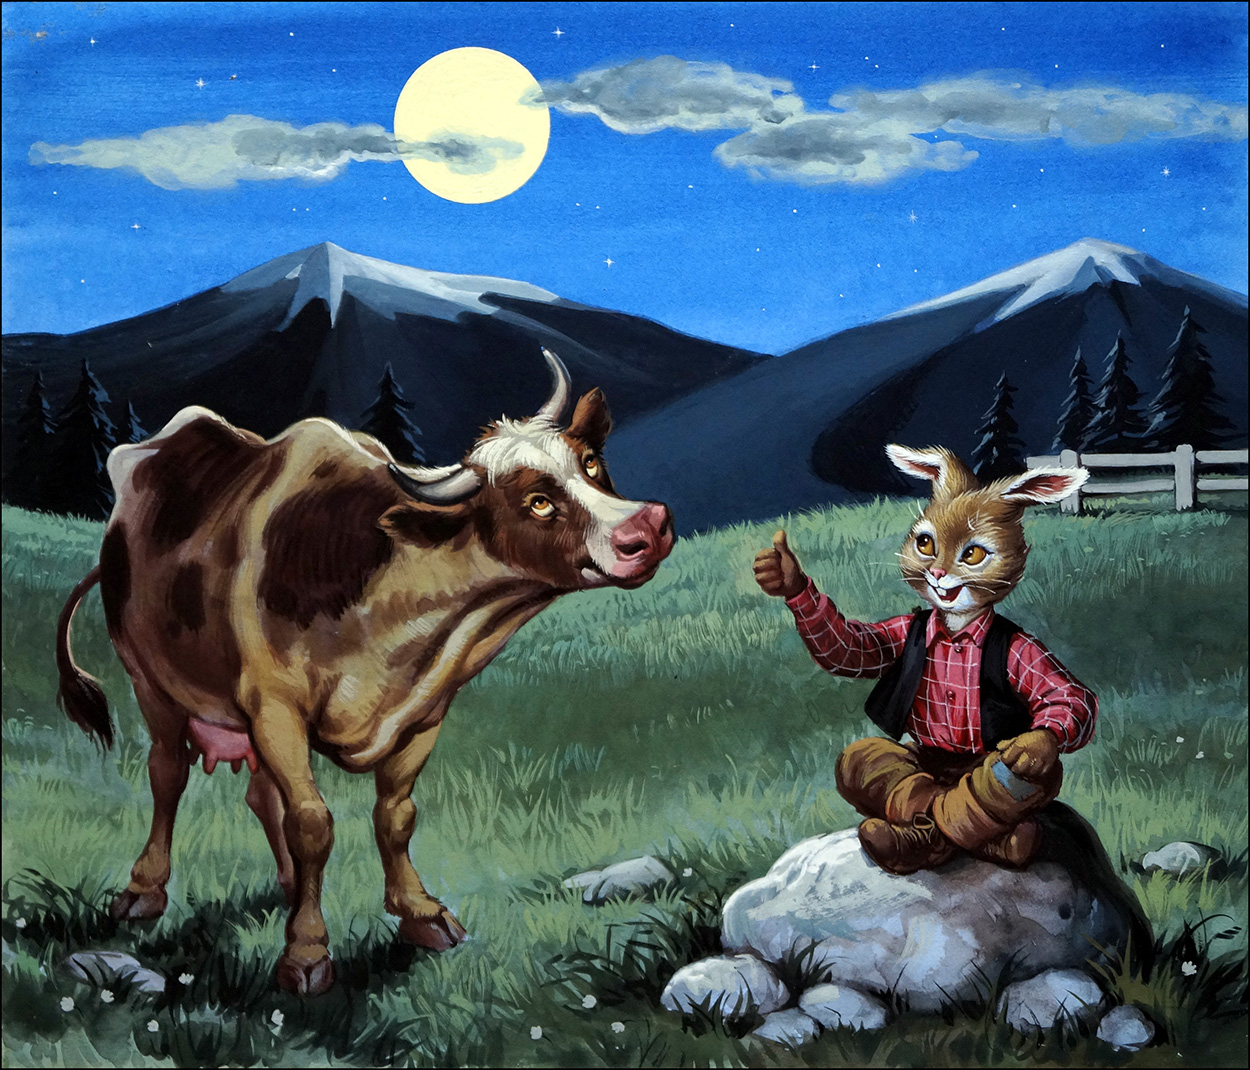 Brer Rabbit and the Cow (Original) art by Virginio Livraghi Art at The Illustration Art Gallery